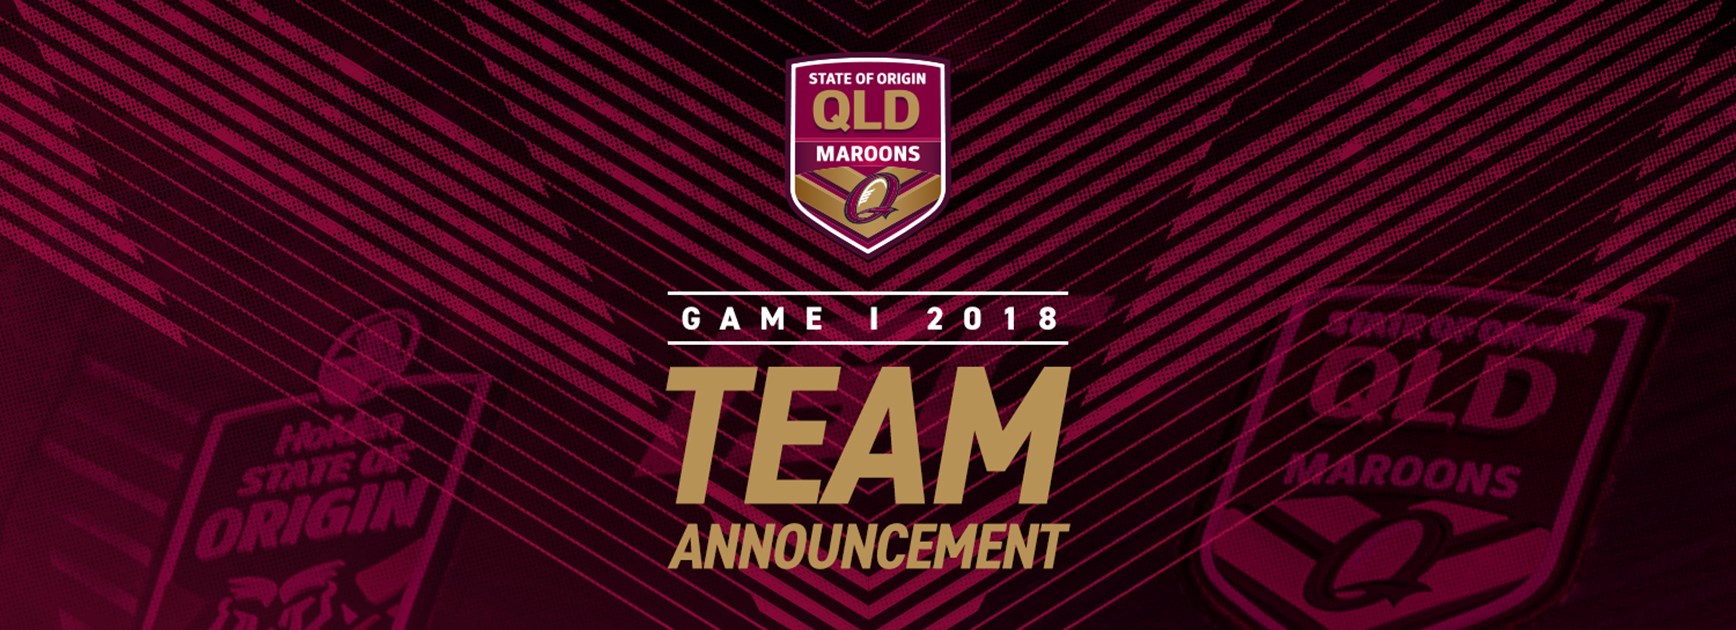 Maroons Game One team announcement